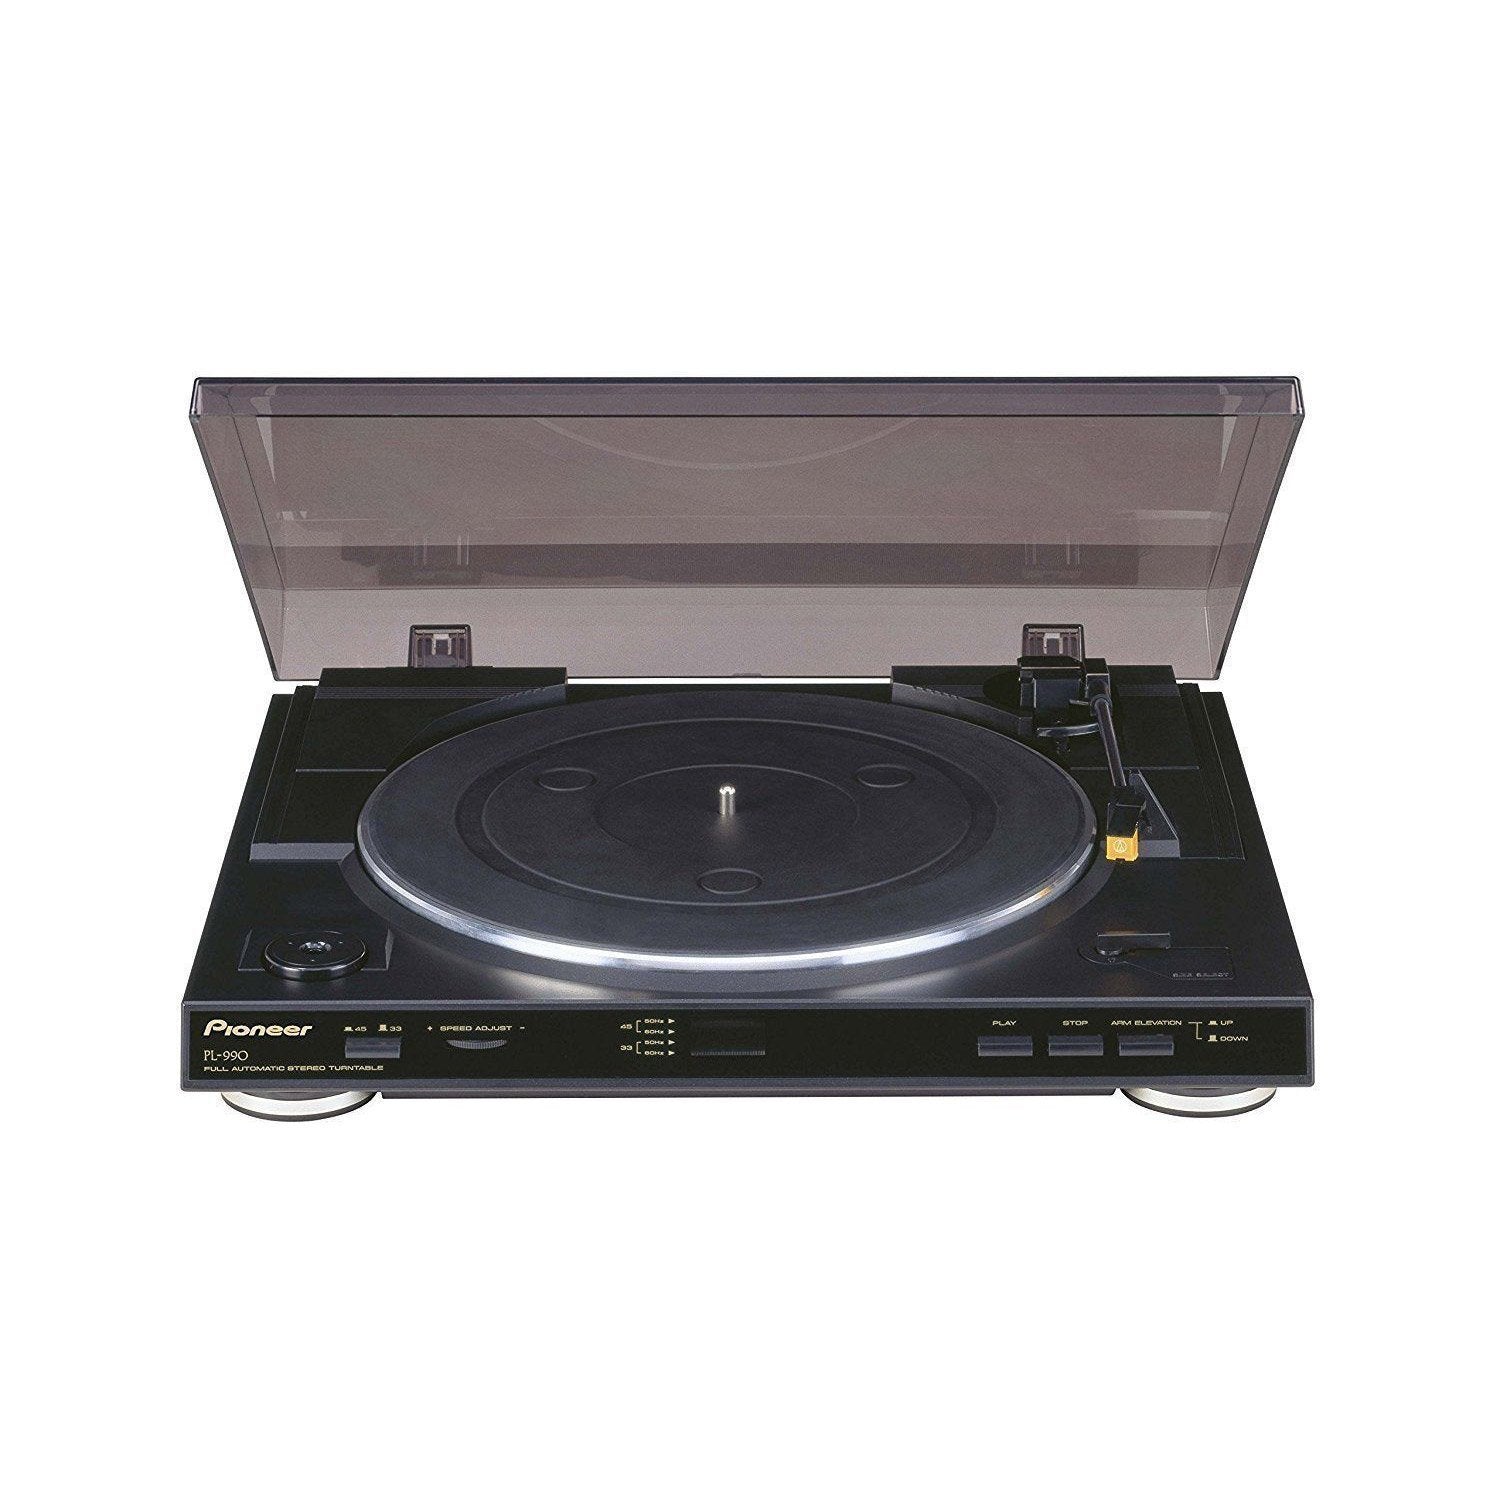 Pioneer PL-990 Automatic Stereo Turntable